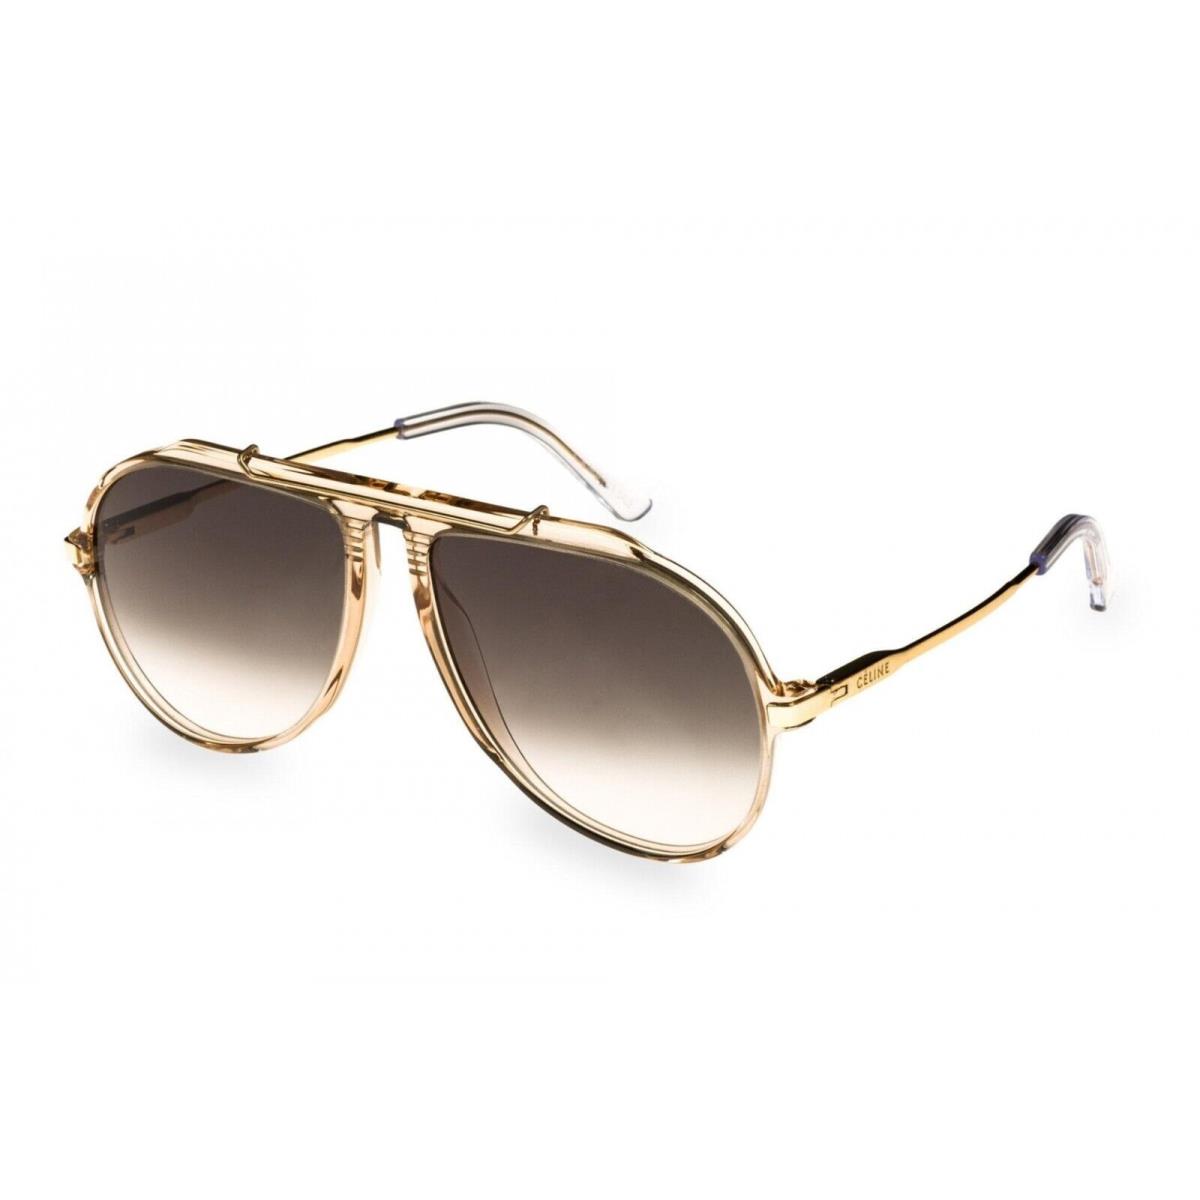 Celine CL40025I 39B Crystal Light Brown Distressed Gold Aviator Sunglasses Italy